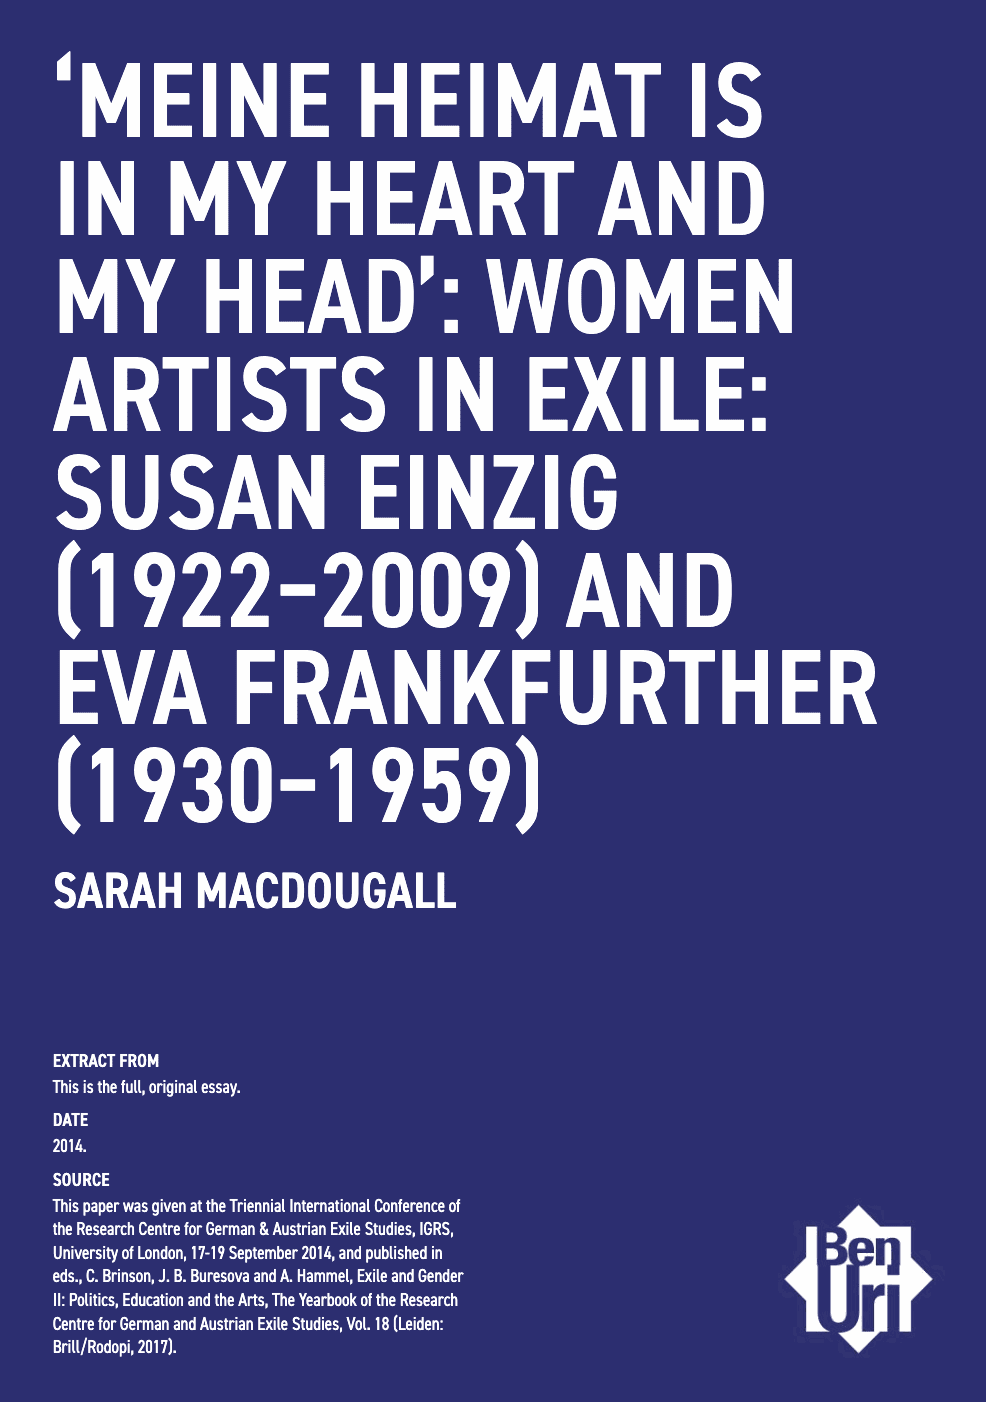 Women Artists in Exile: Einzig & Frankfurther by Sarah MacDougall Read it here